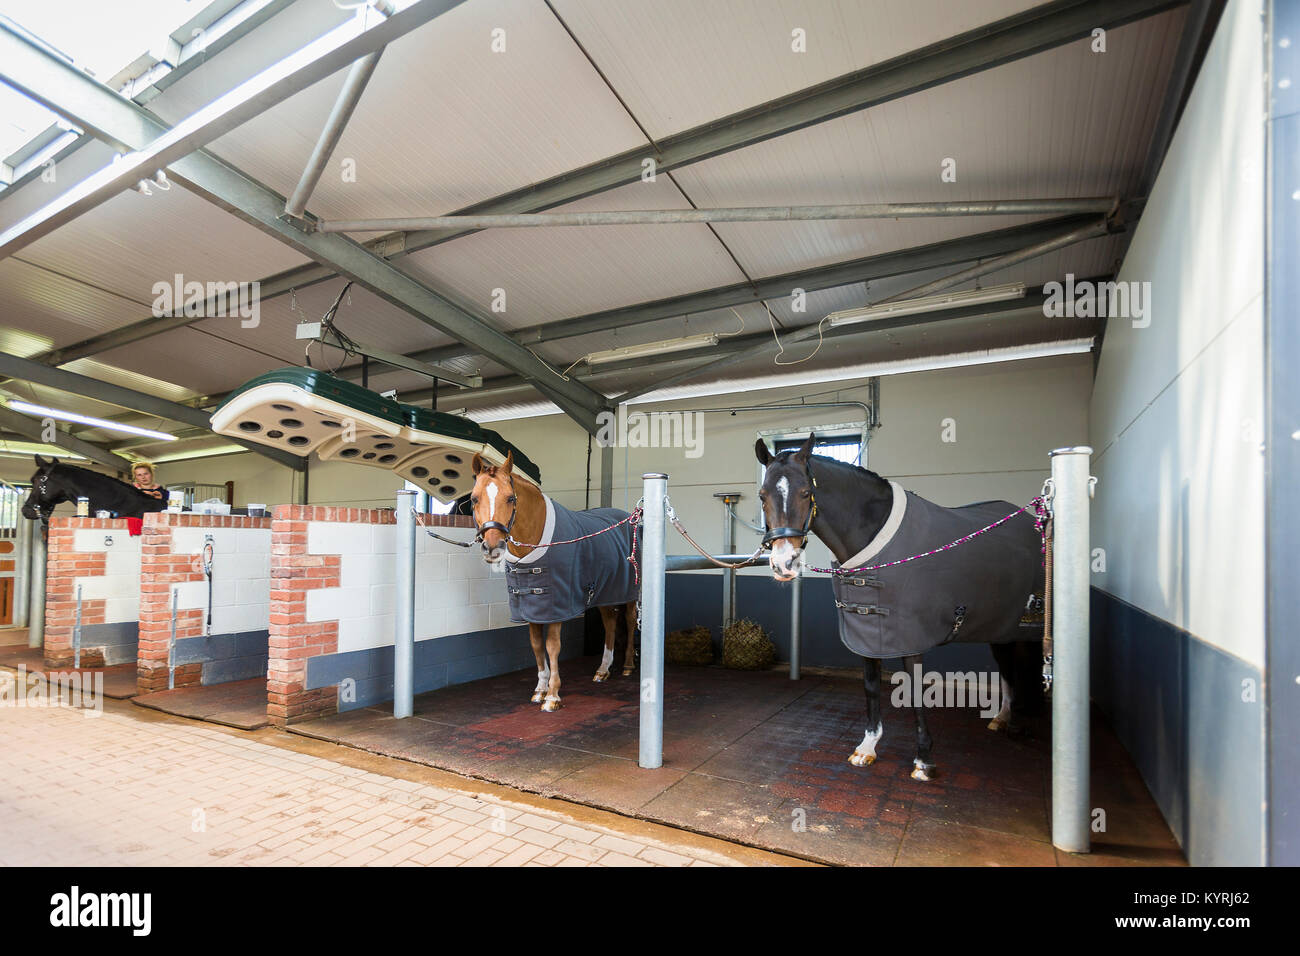 Domestic horse. Horses in a work area for grooming. Great Britain Stock Photo